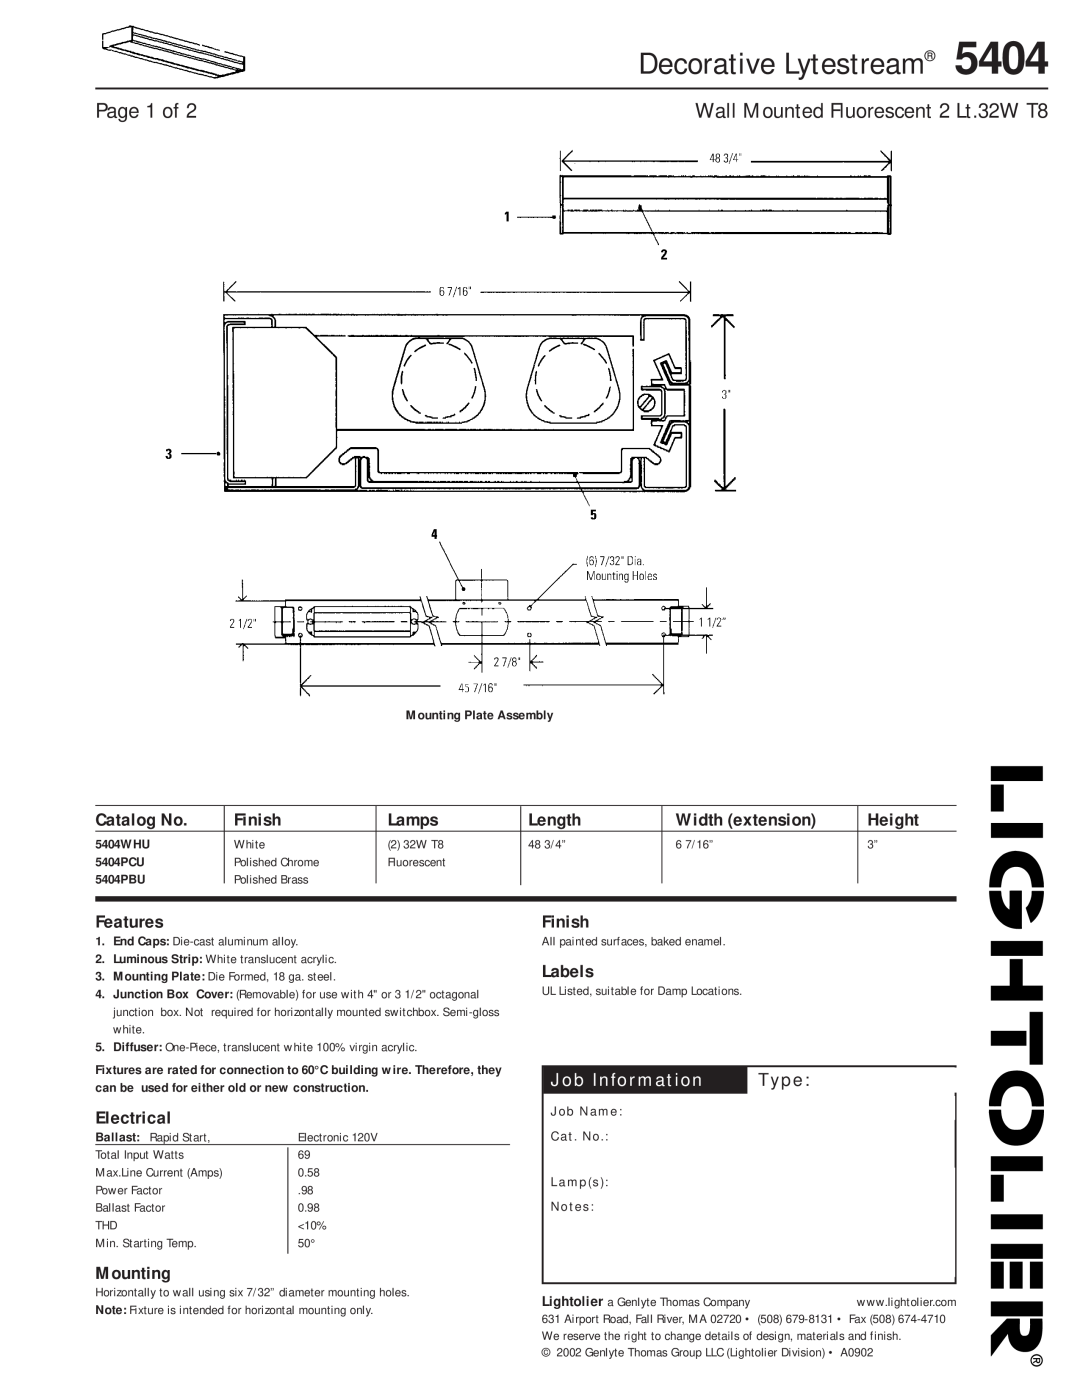 Lightolier 5404 manual Decorative Lytestream, Page 1 of, Catalog No, Finish, Lamps, Length, Width extension, Height 